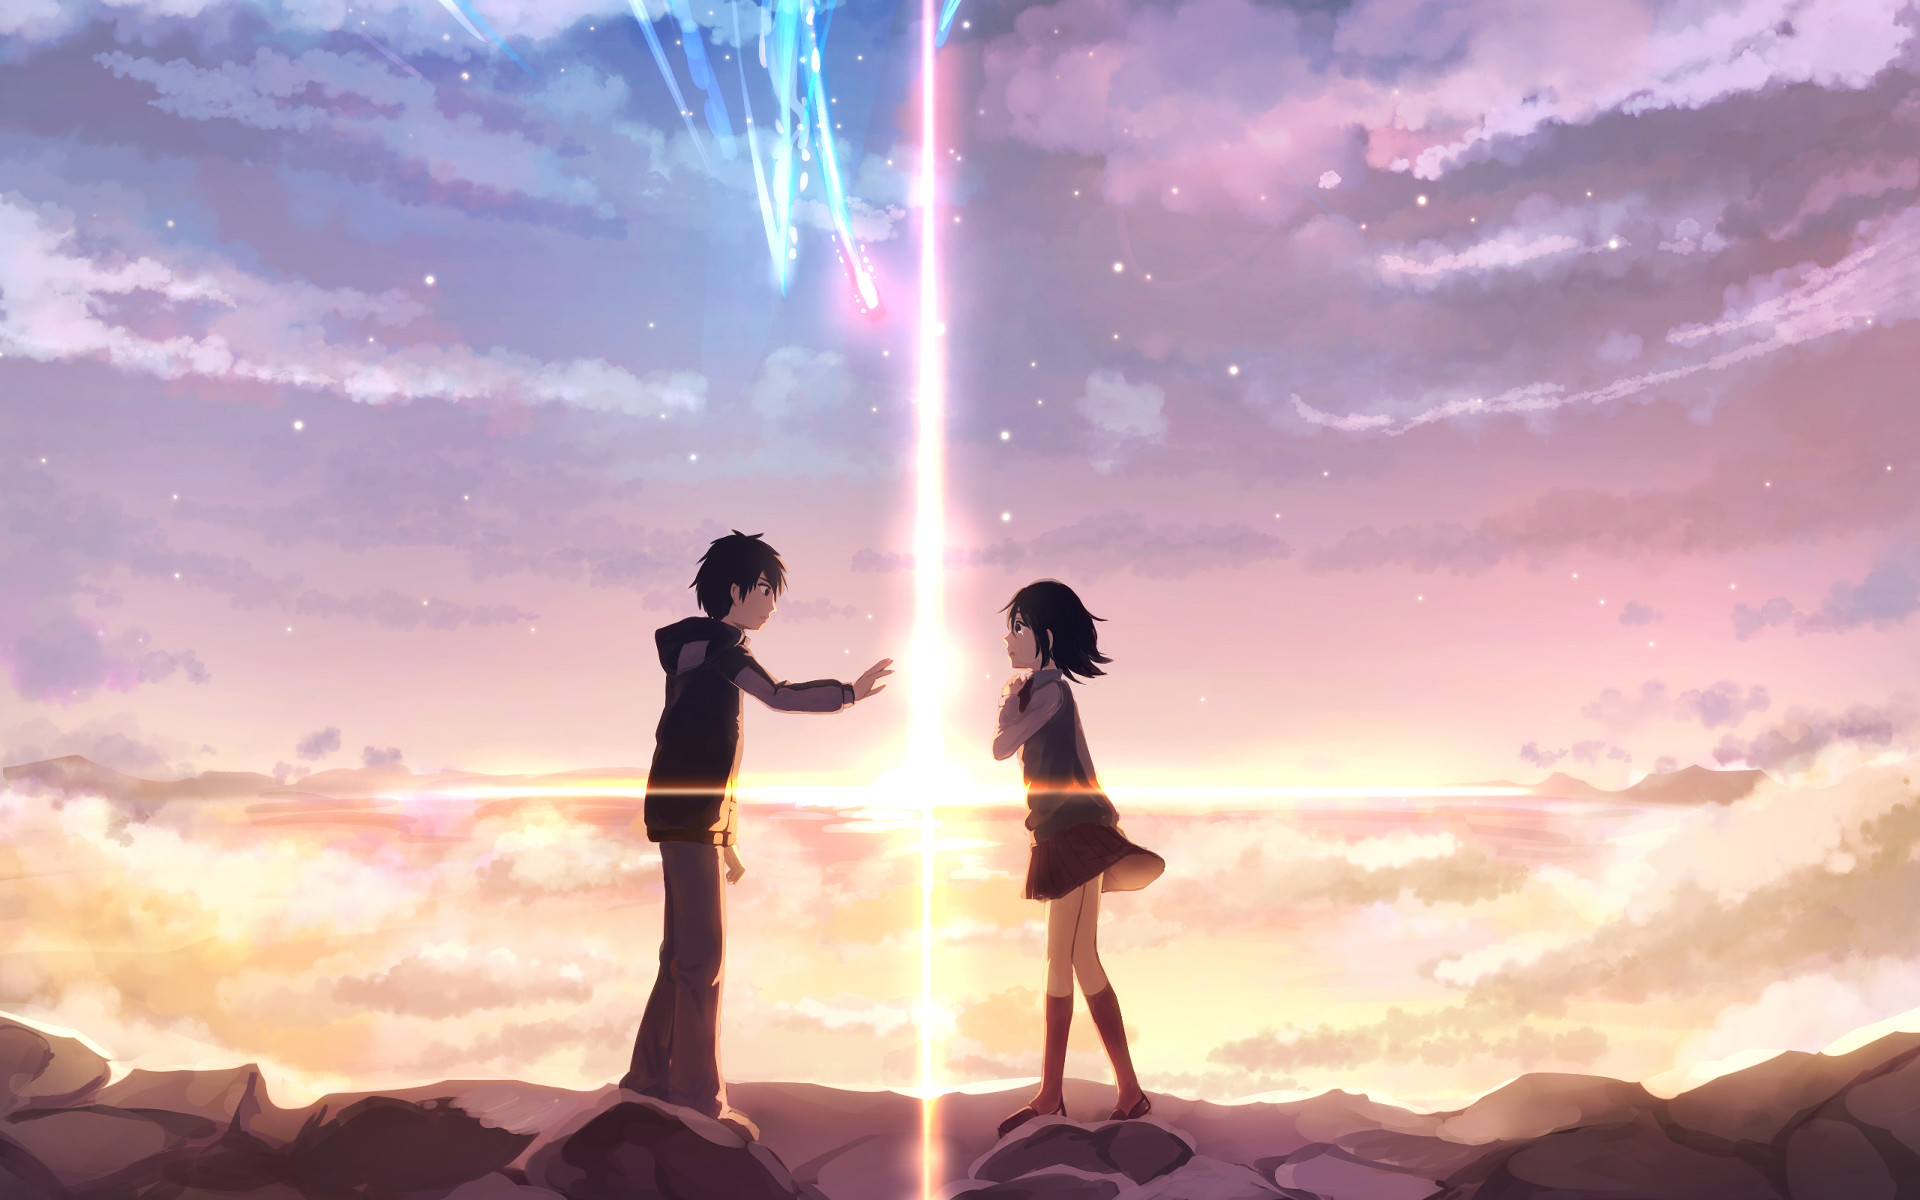 21545 Your Name Anime  Android iPhone Desktop HD Backgrounds   Wallpapers 1080p 4k HD Wallpapers Desktop Background  Android   iPhone 1080p 4k 1080x1763 2023